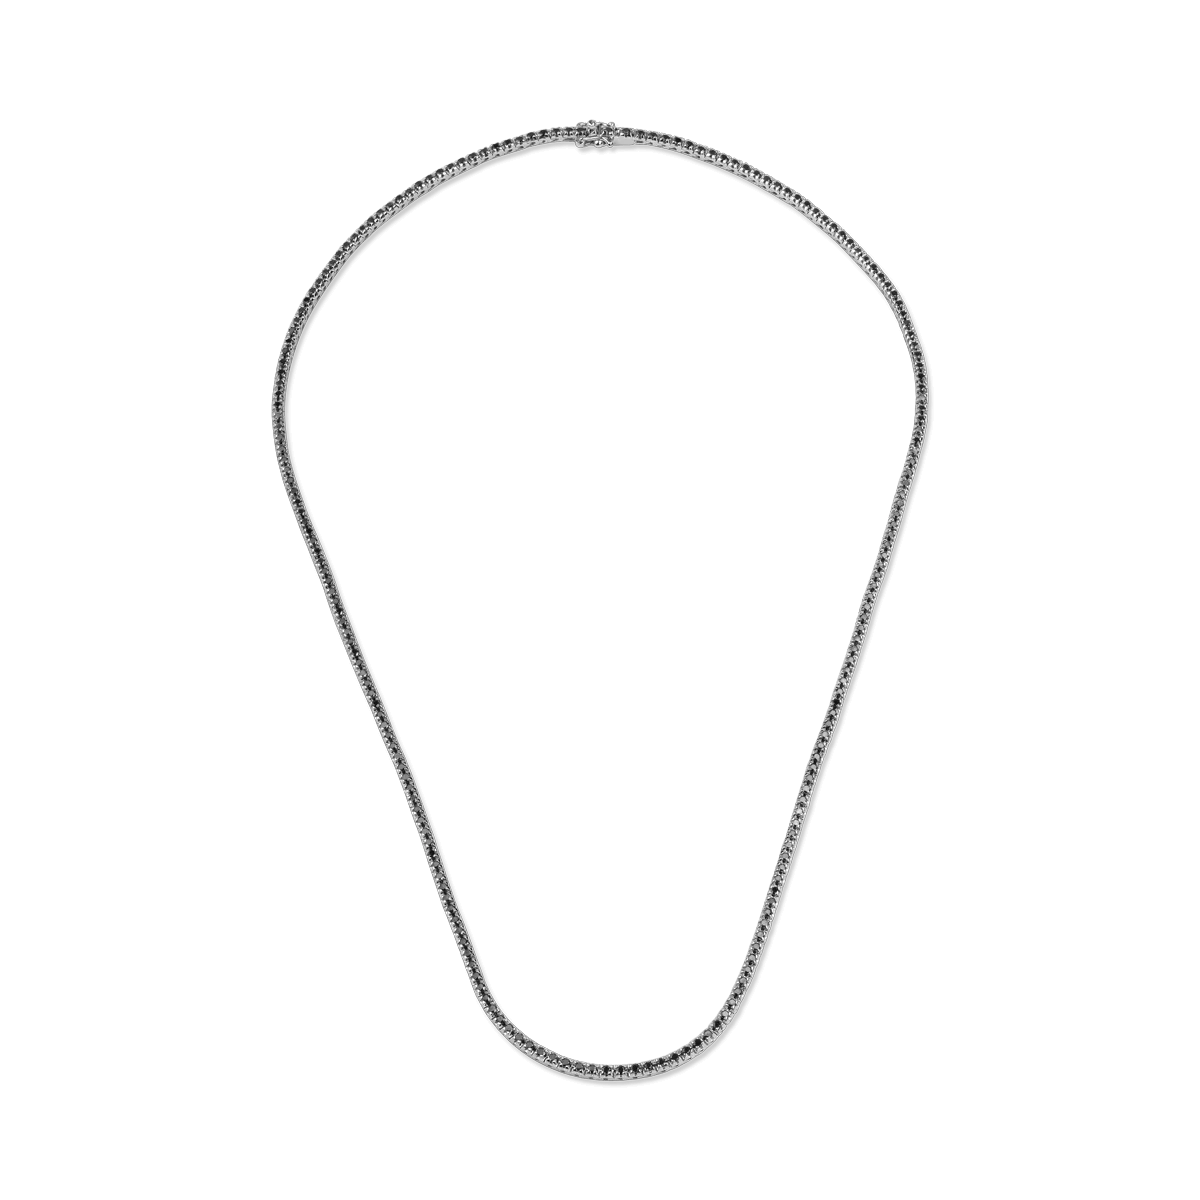 18K white gold tennis necklace with 2.35ct black diamonds